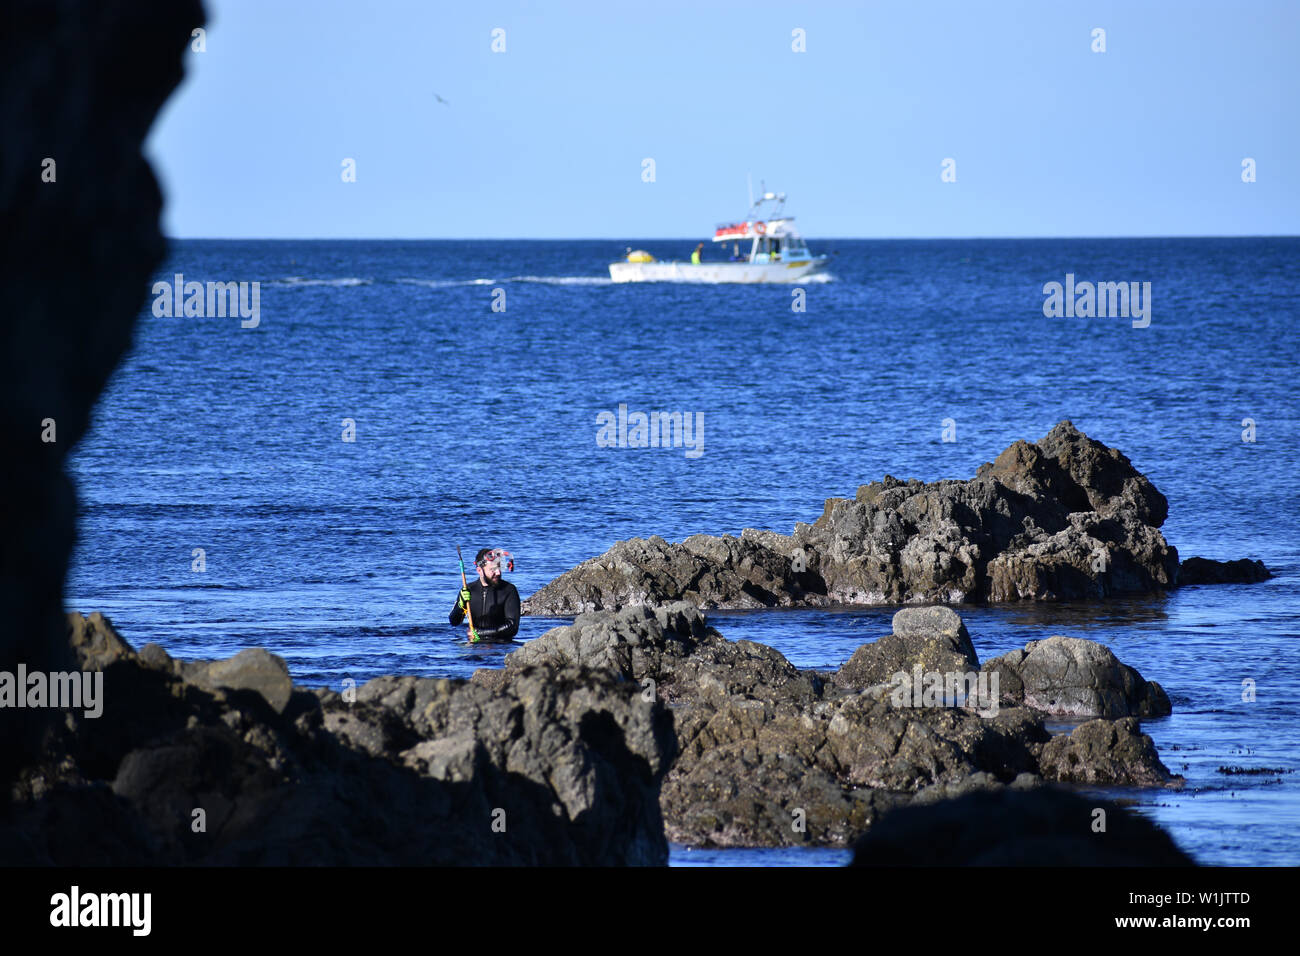 Spearfishing diver above water with fishing boat in background New Zealand Stock Photo